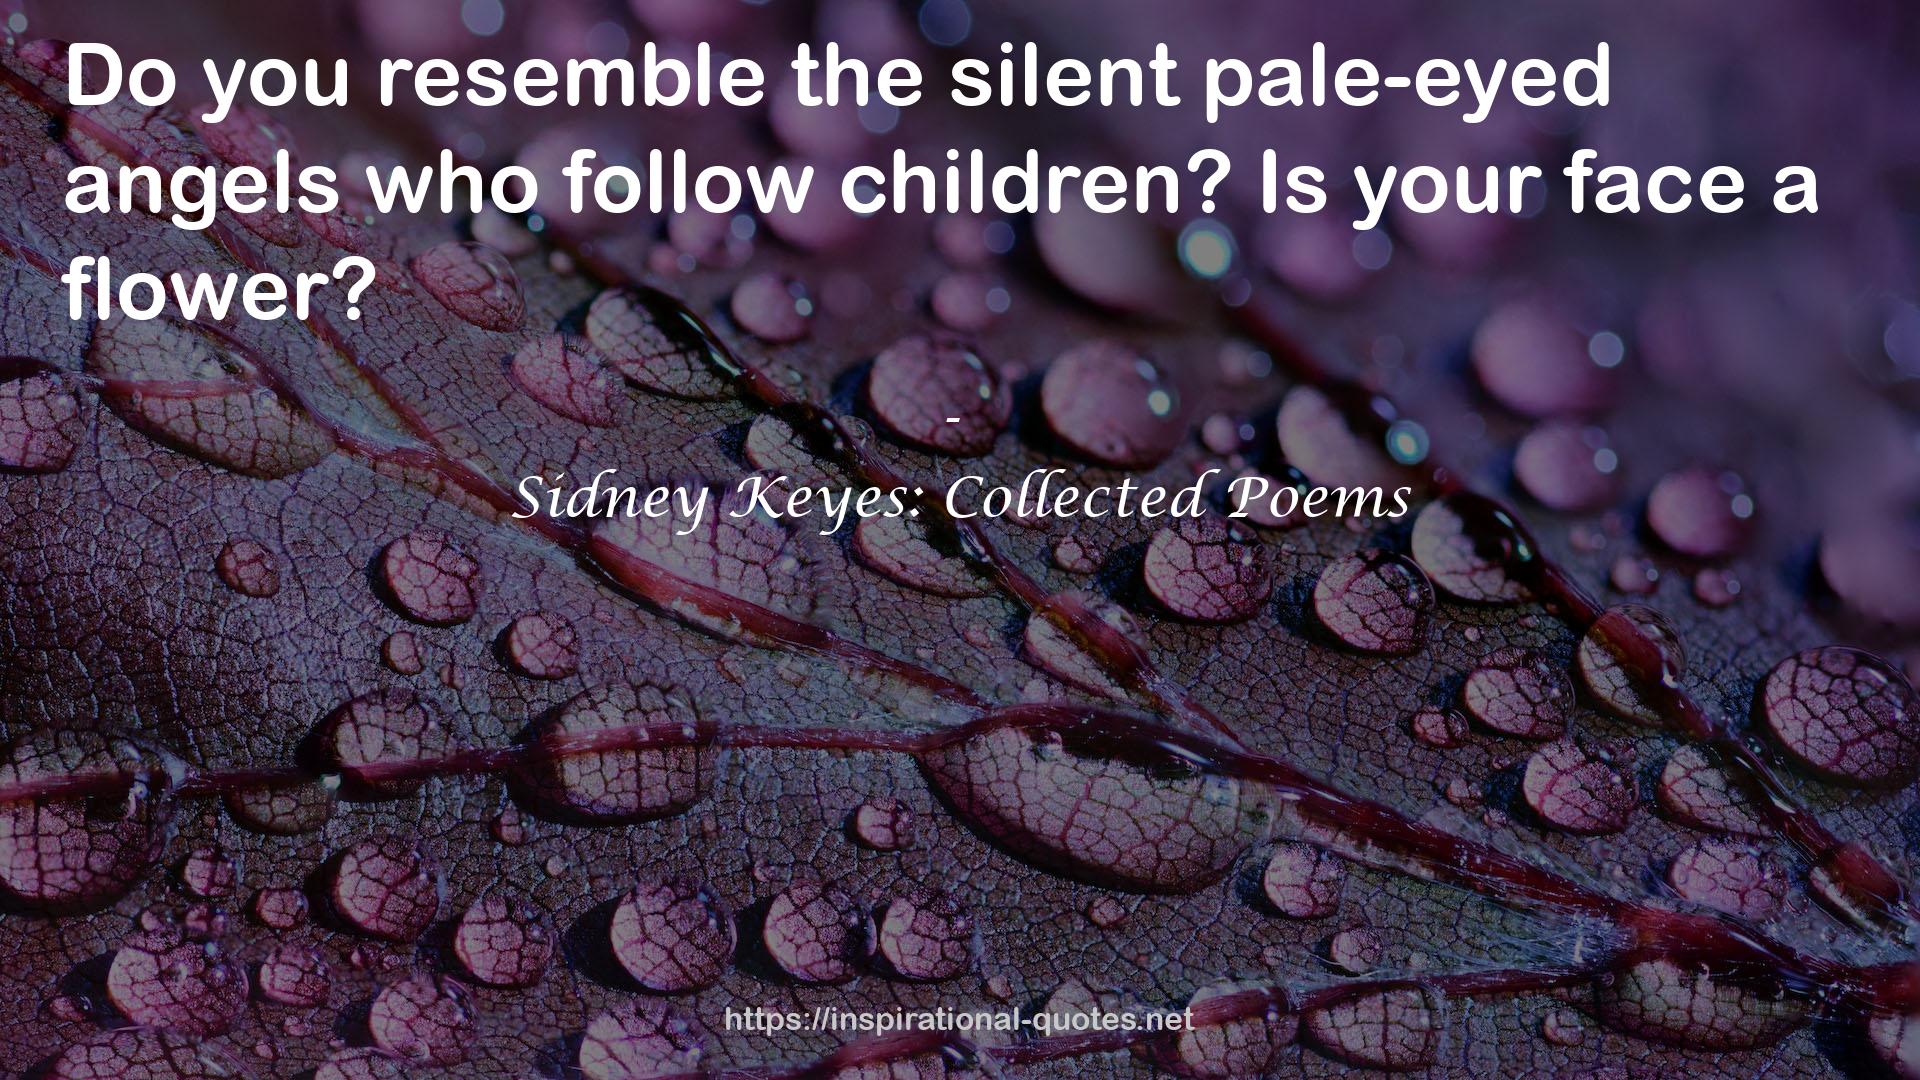 Sidney Keyes: Collected Poems QUOTES